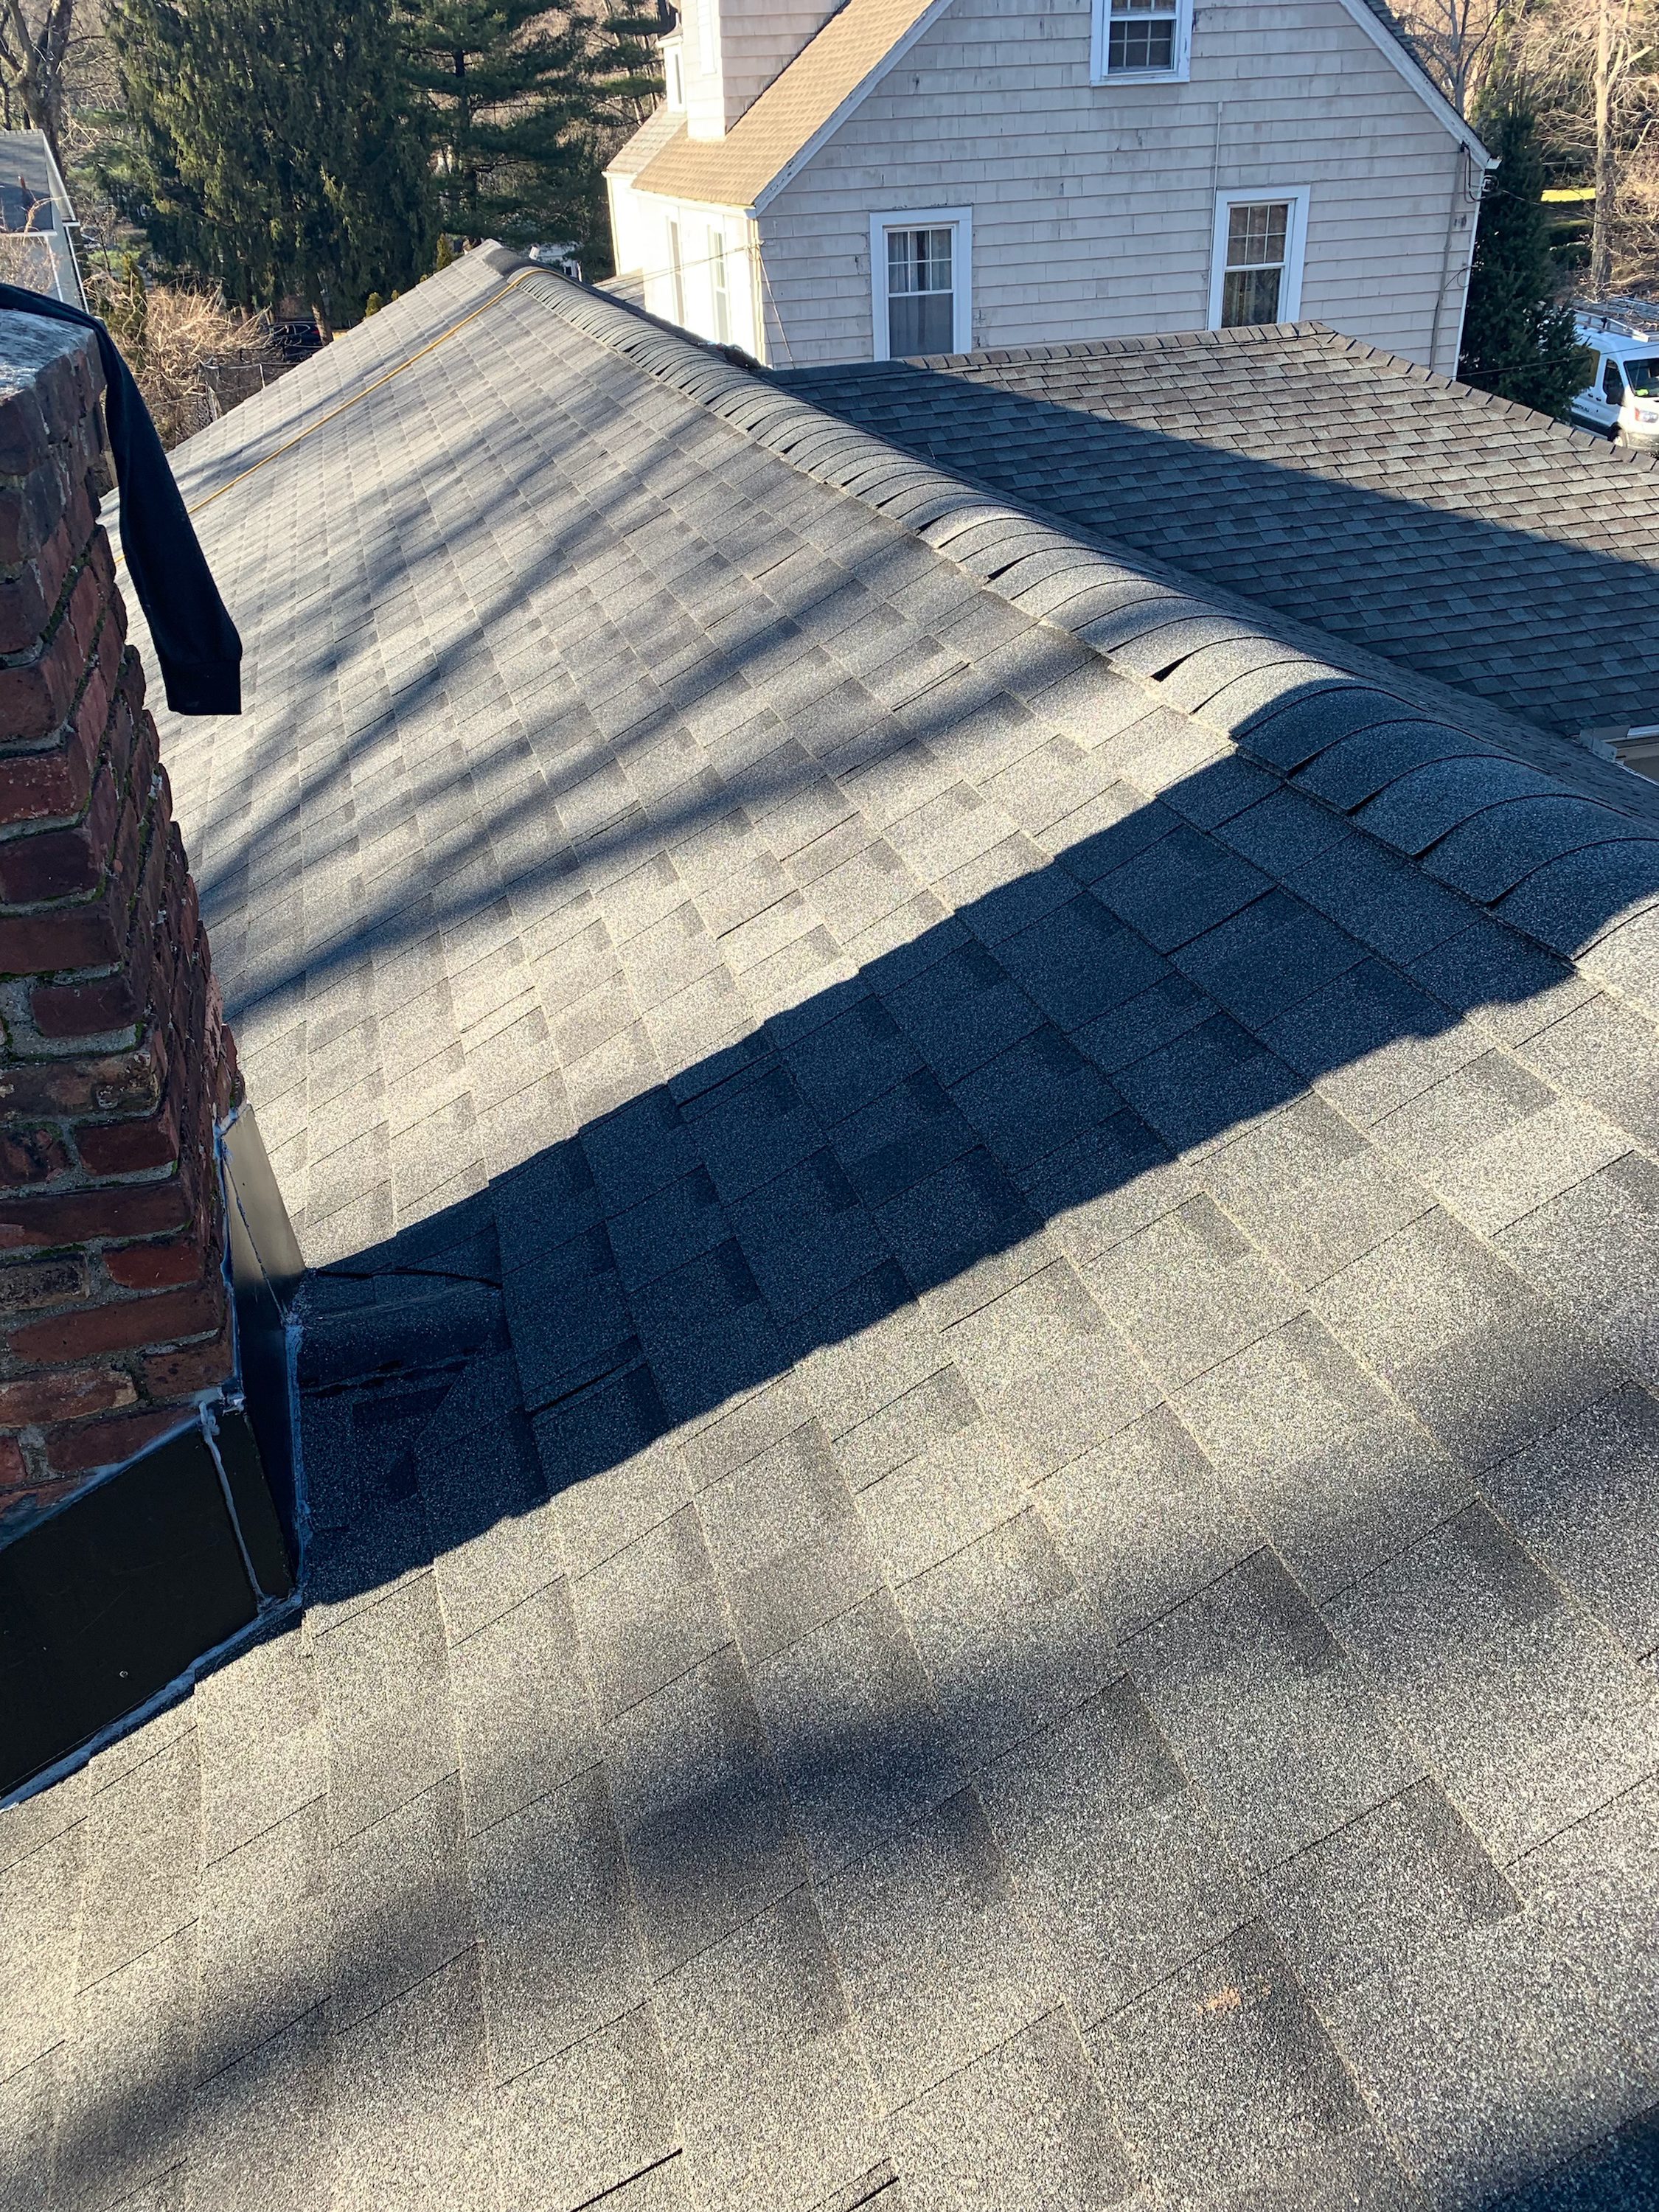 South Orange New Jersey Roof Replacement New Jersey Roofing Maintenance